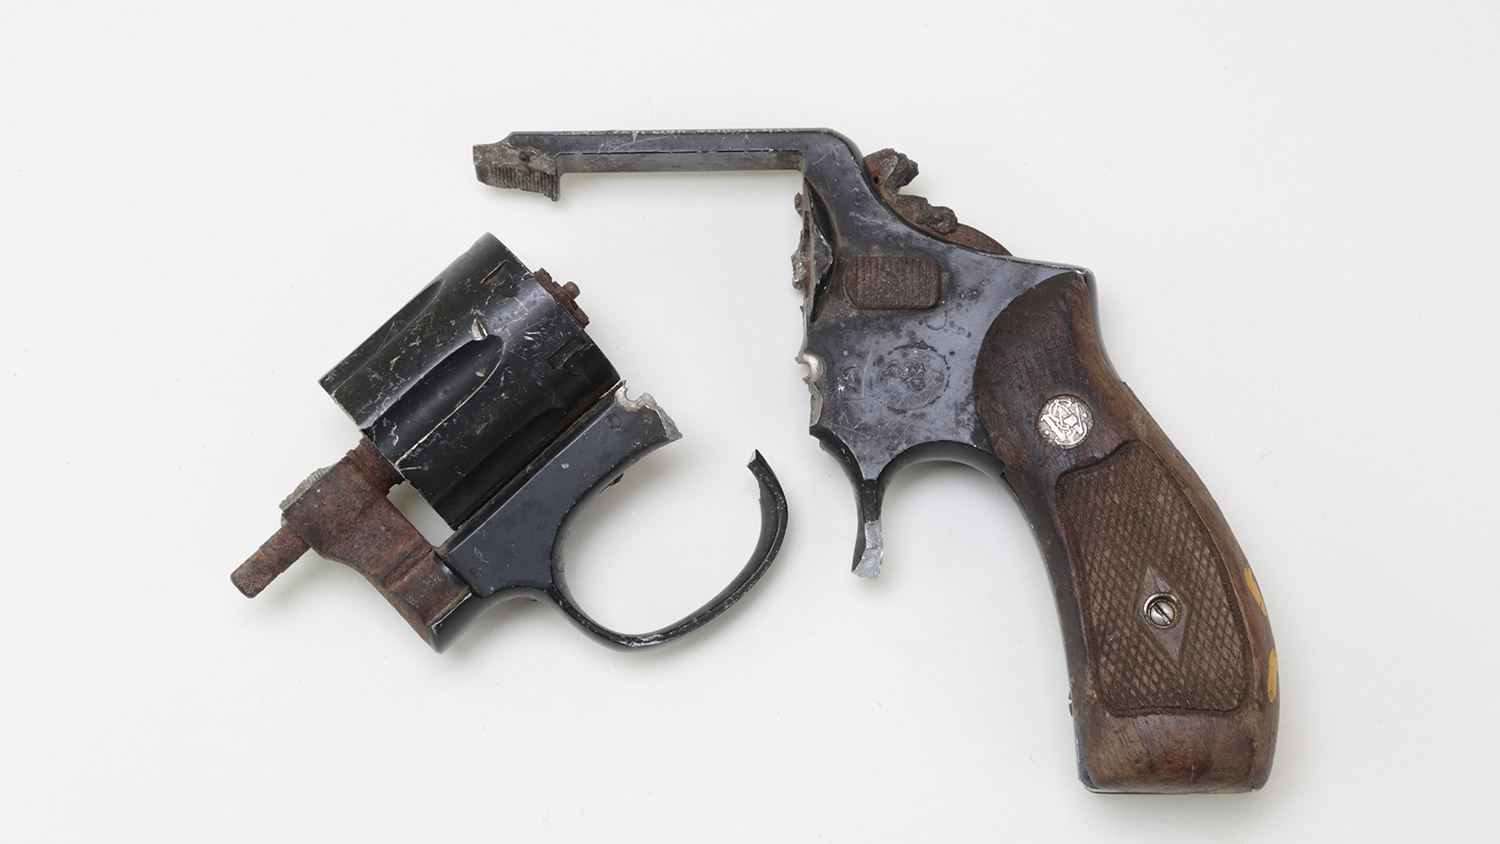 What Happened When The Air Force Tried Aluminum Revolvers?